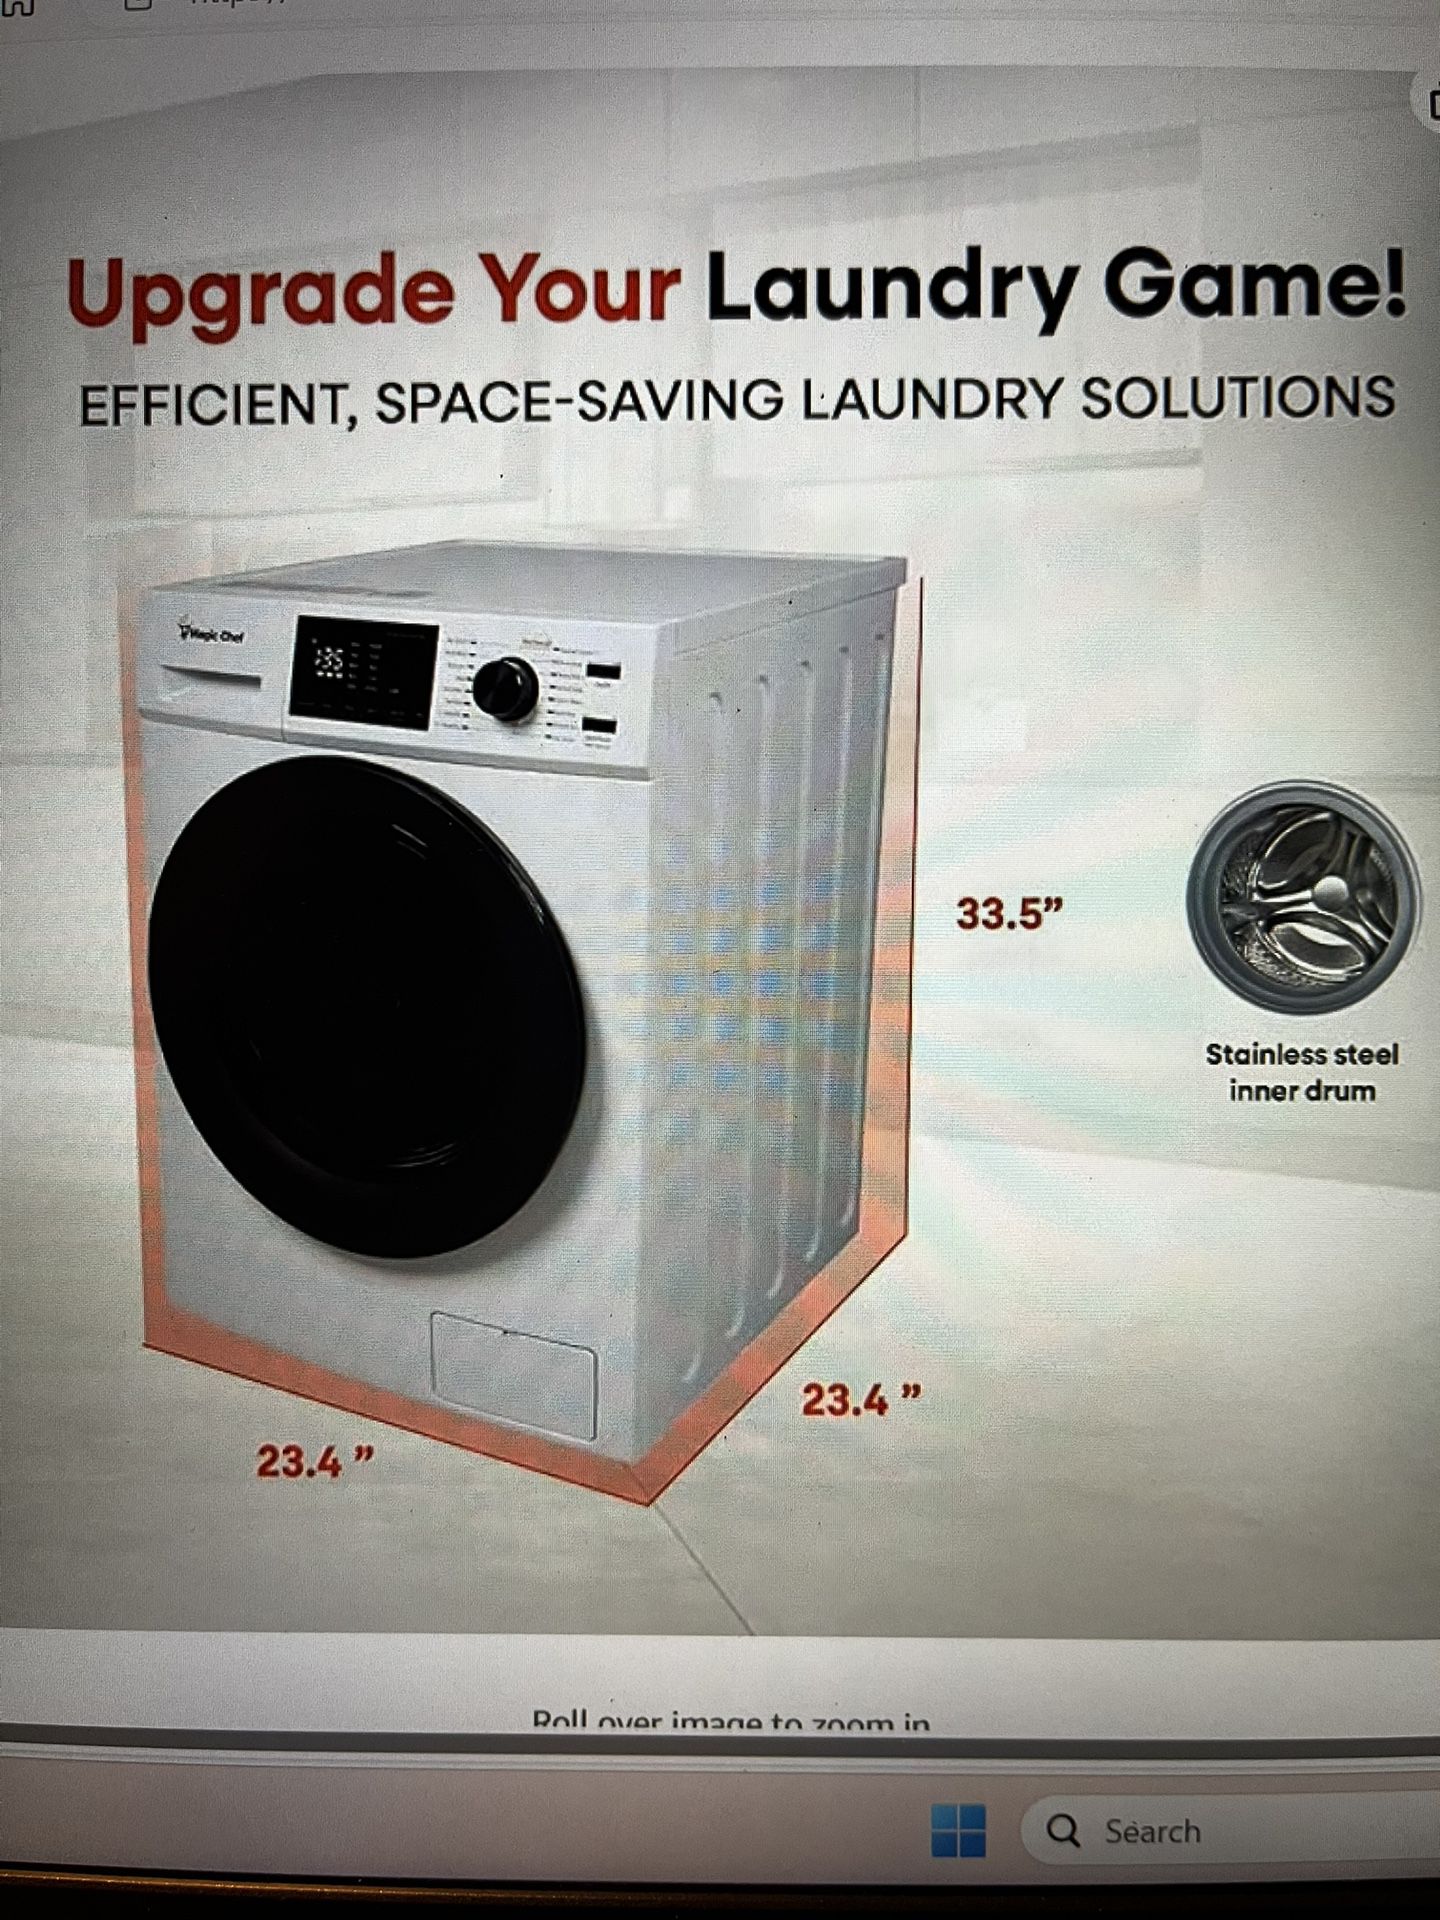 Washer/Dryer Combo Electric